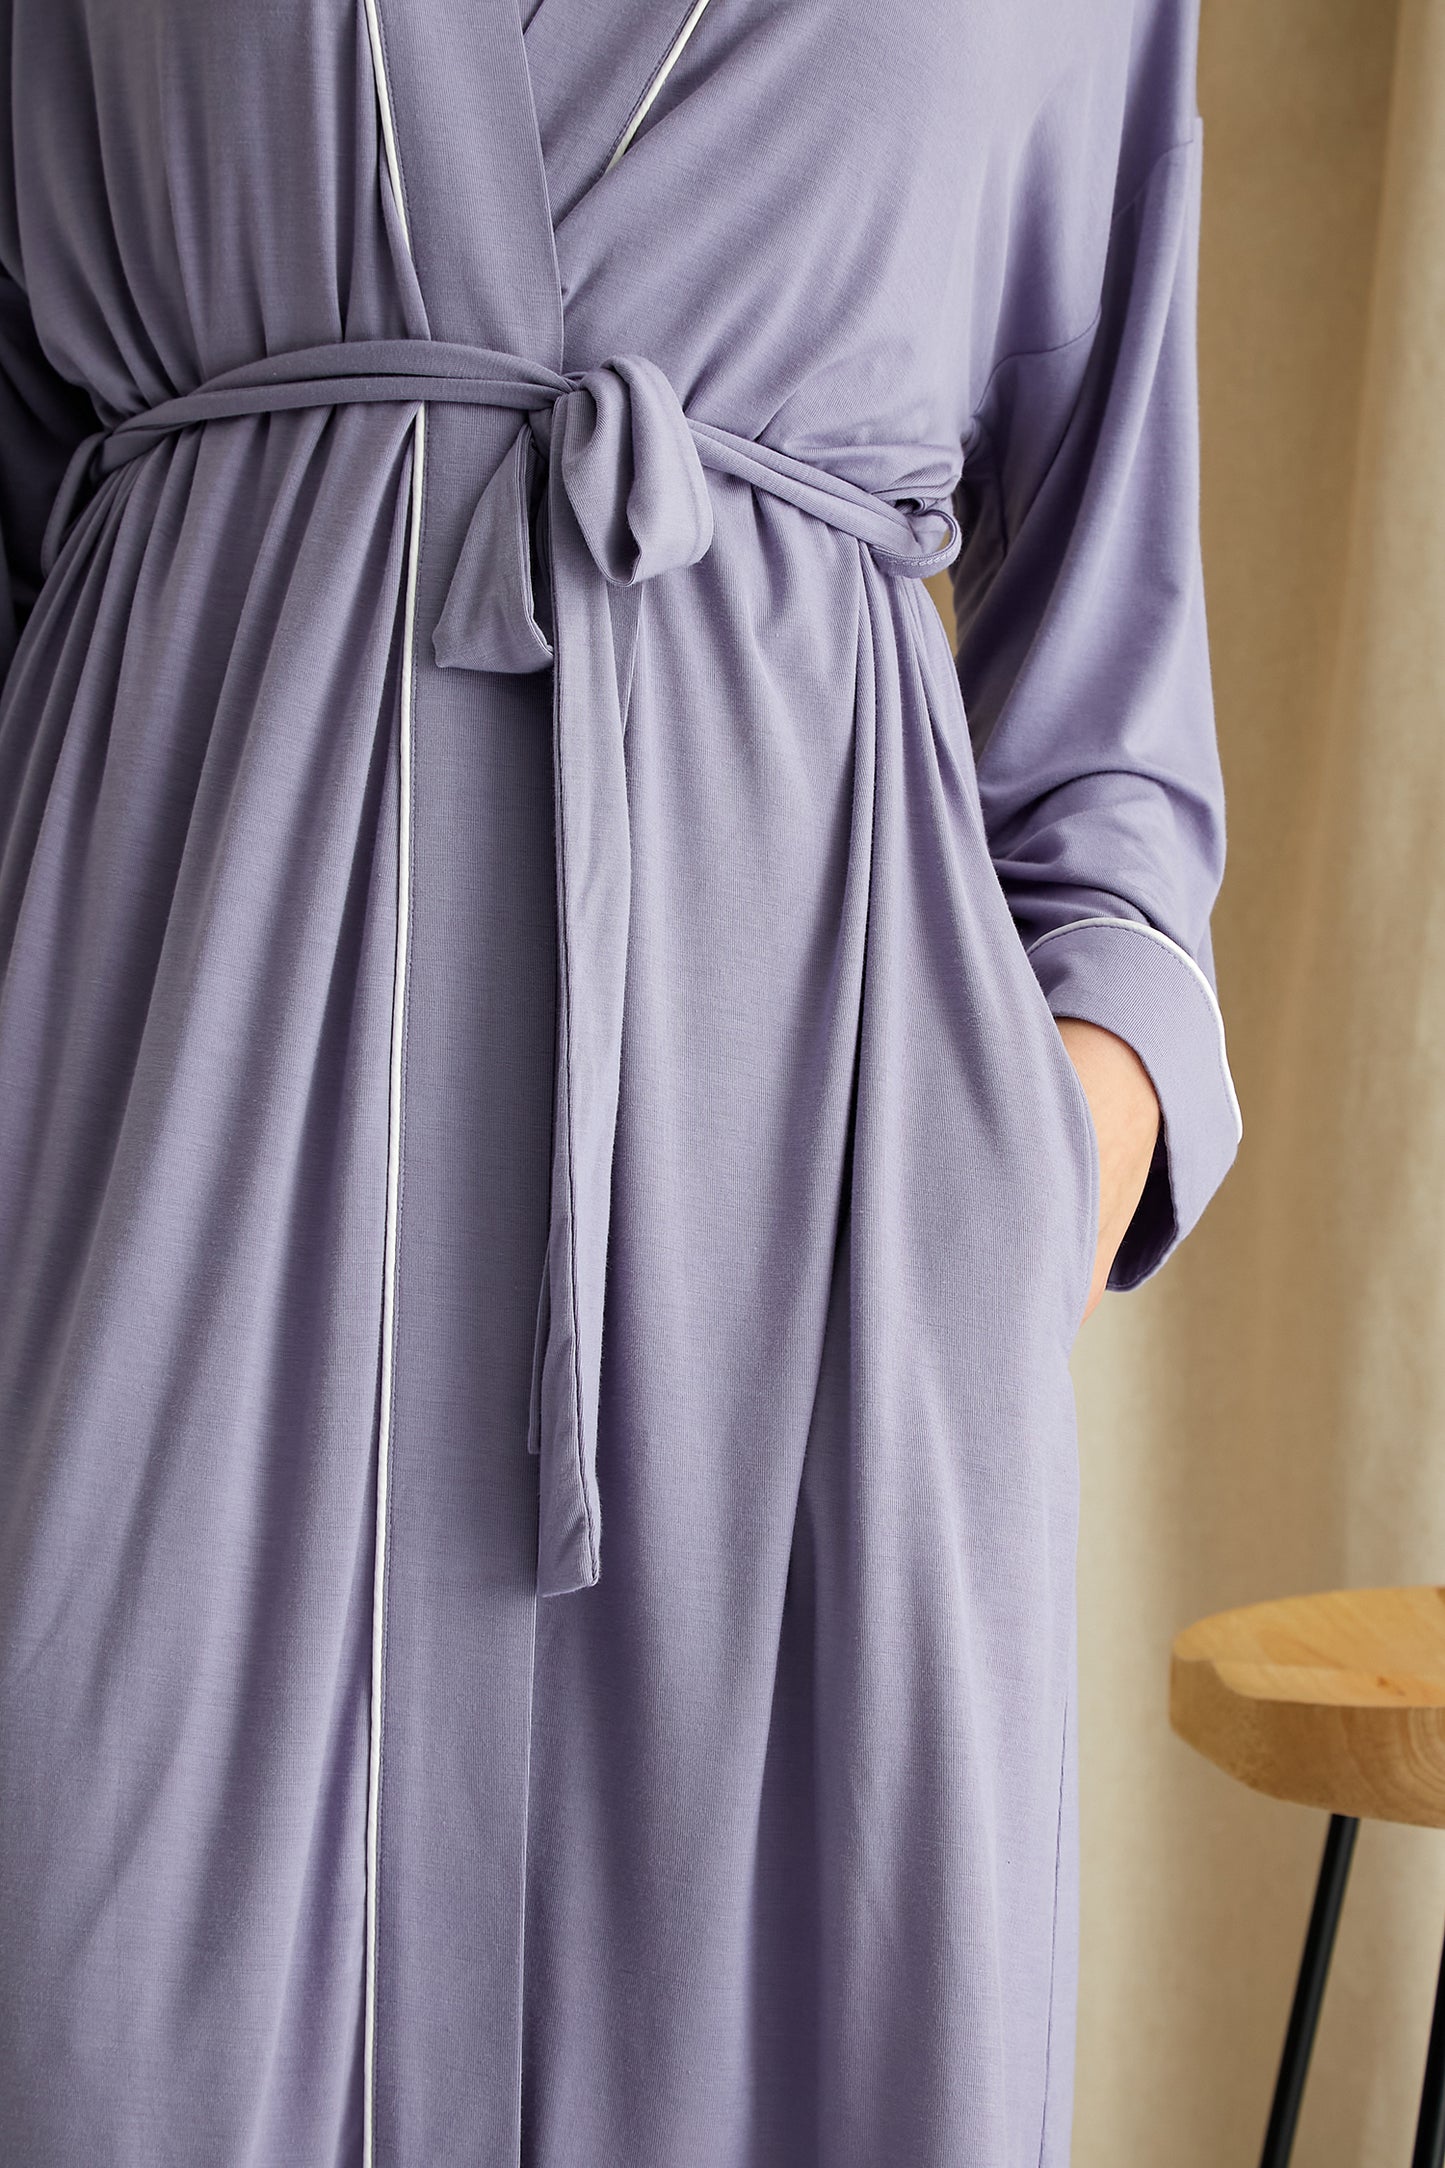 Women's Bamboo Kimono Robe in Lavender with functional tie and deep pockets from Pretty You London